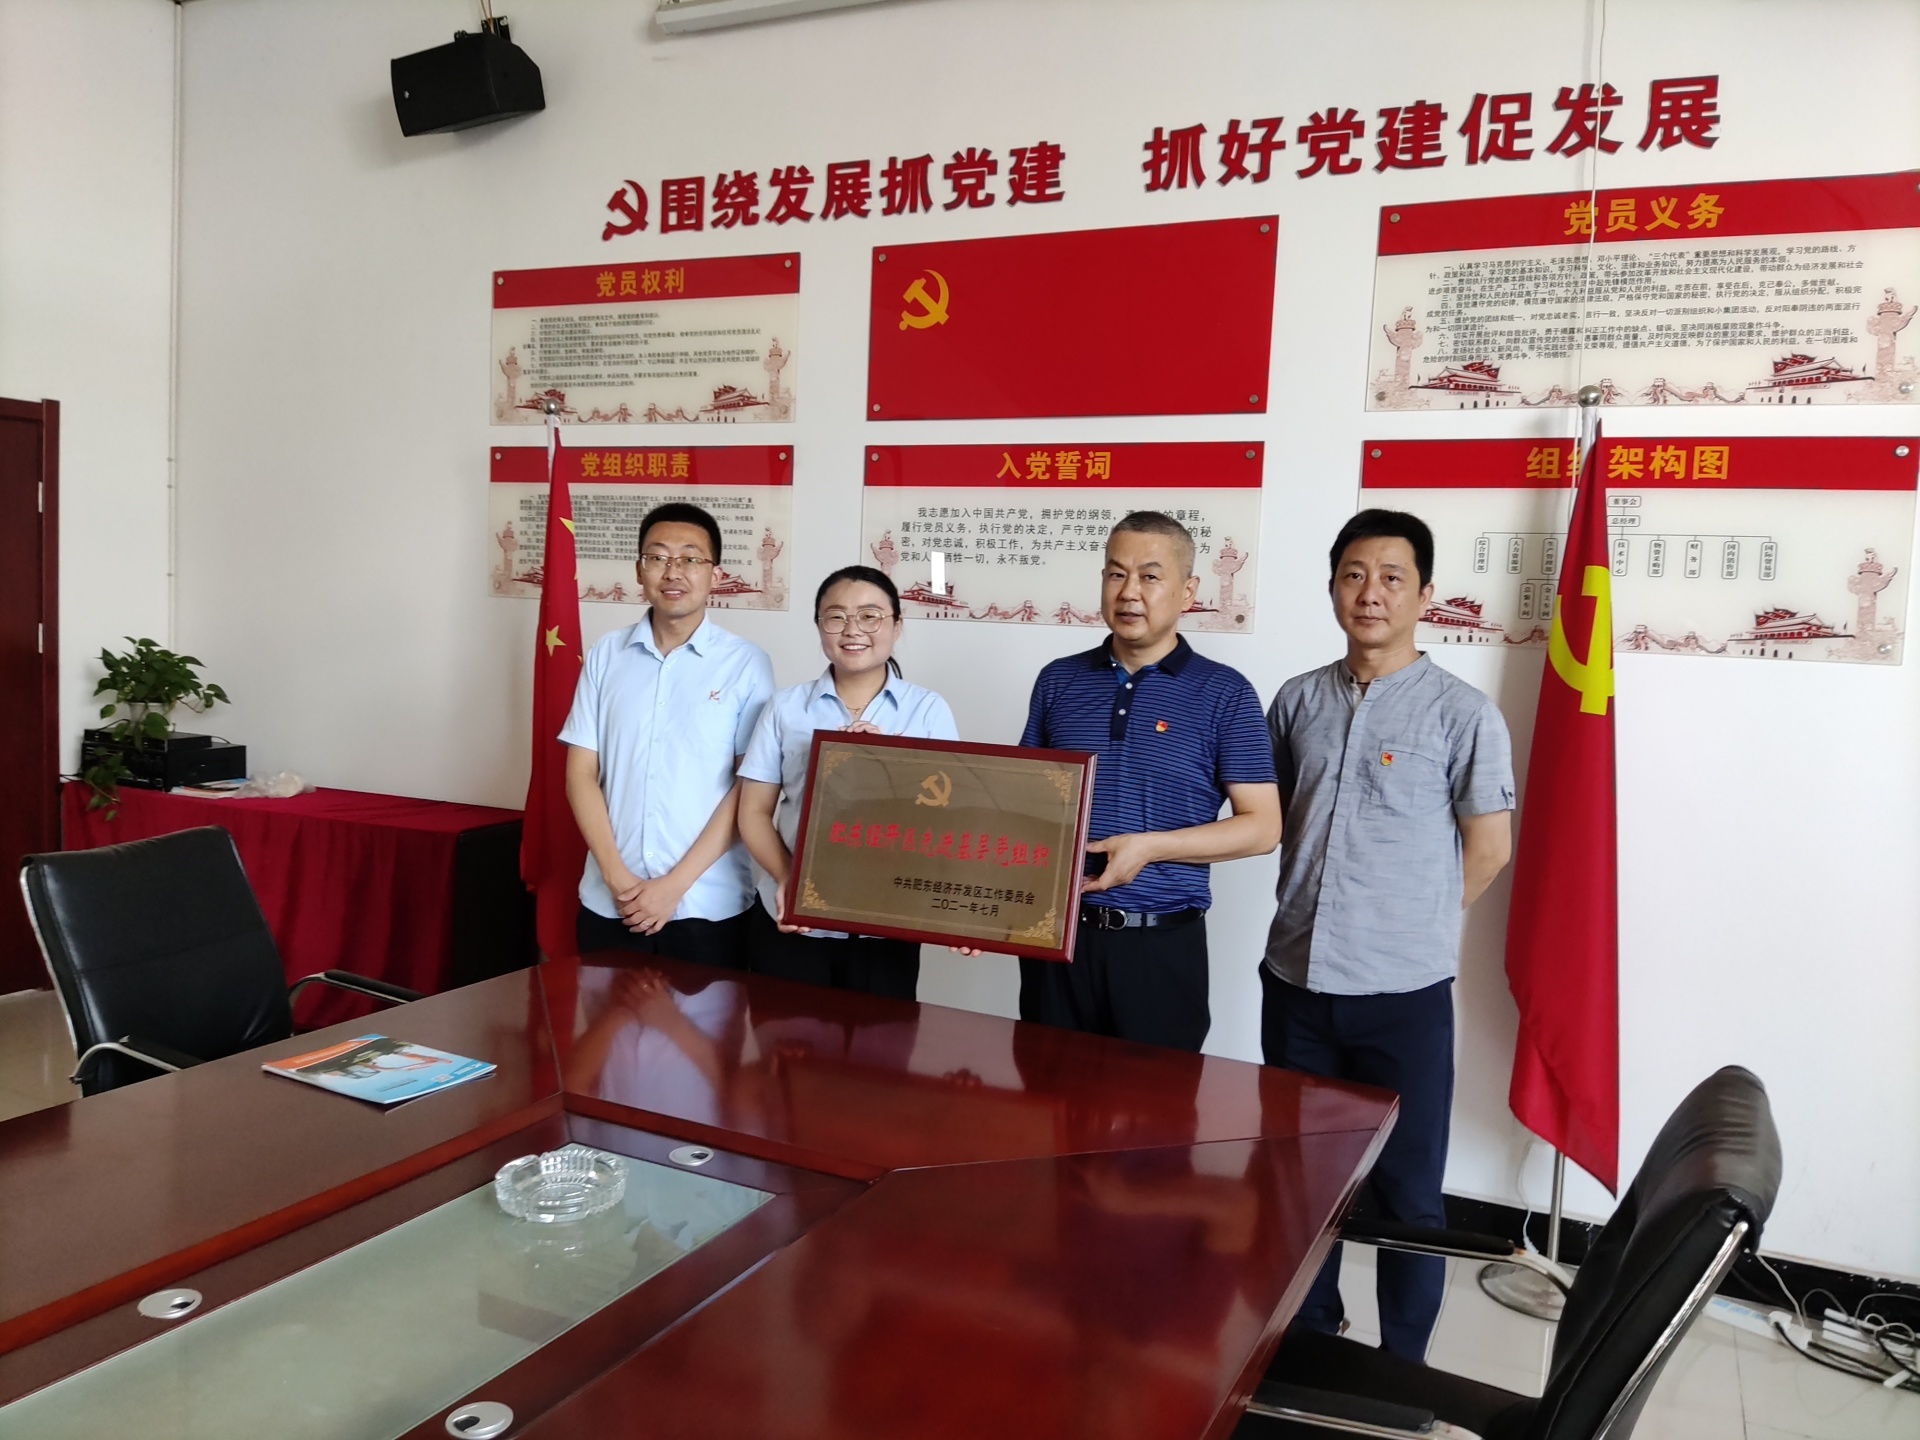 Anhui Hekuang Environmental Technology Co., Ltd. won the title of advanced grass-roots party organization in Feidong Economic Development Zone.